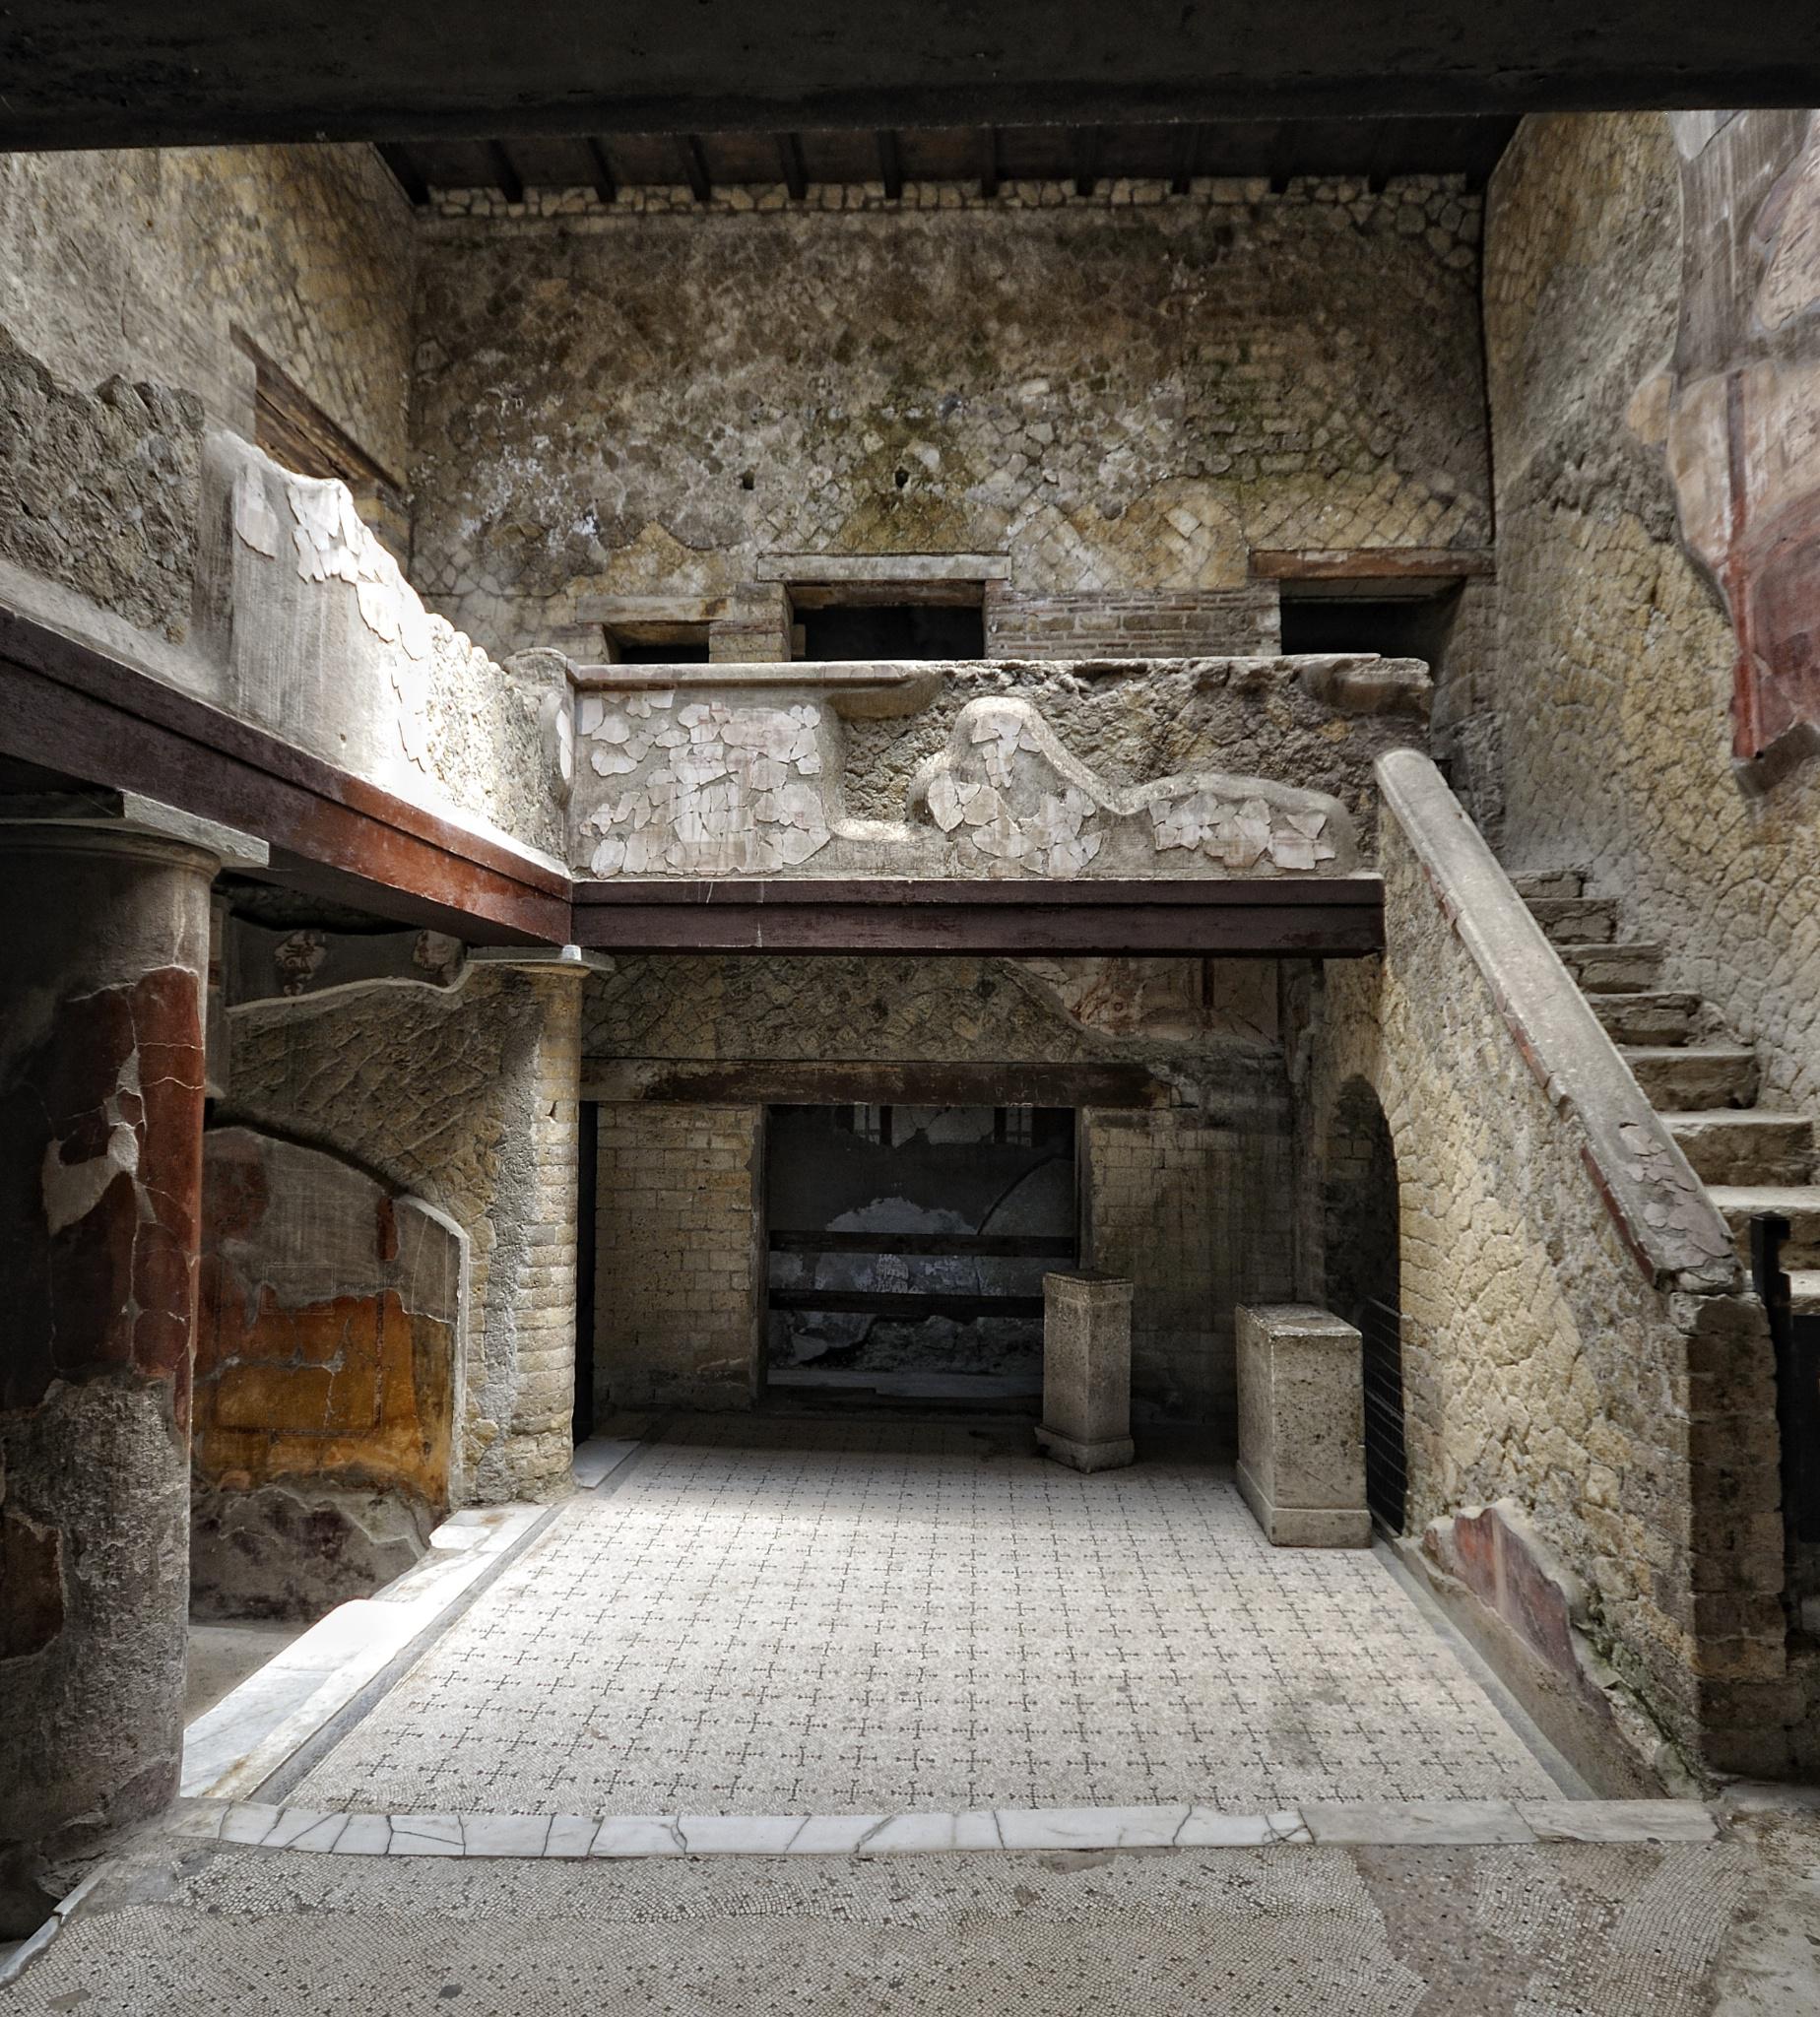 A room from the excavated ruins Of Herculaneum – Destroyed during the eruption of Mount Vesuvius on 24 August 79 AD.jpg